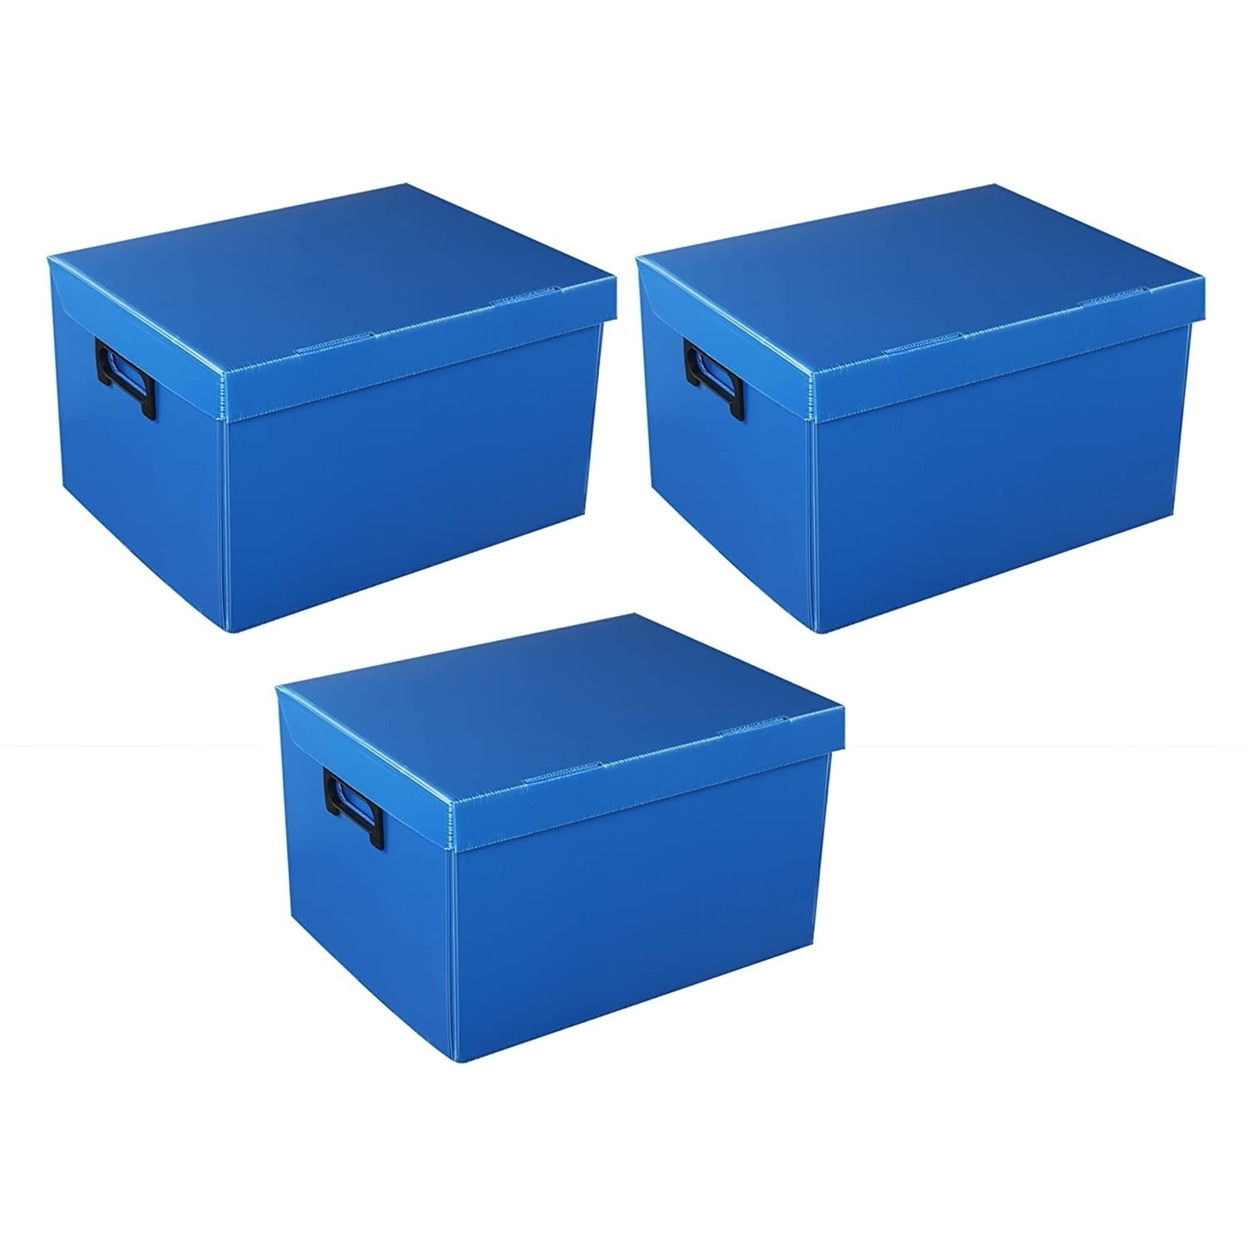 (3 Set) Vaiyer Durable Plastic Filing Storage Organizer Box With Lid, Storage Bins Baskets Containers For Home Office Cabinet For Office Use